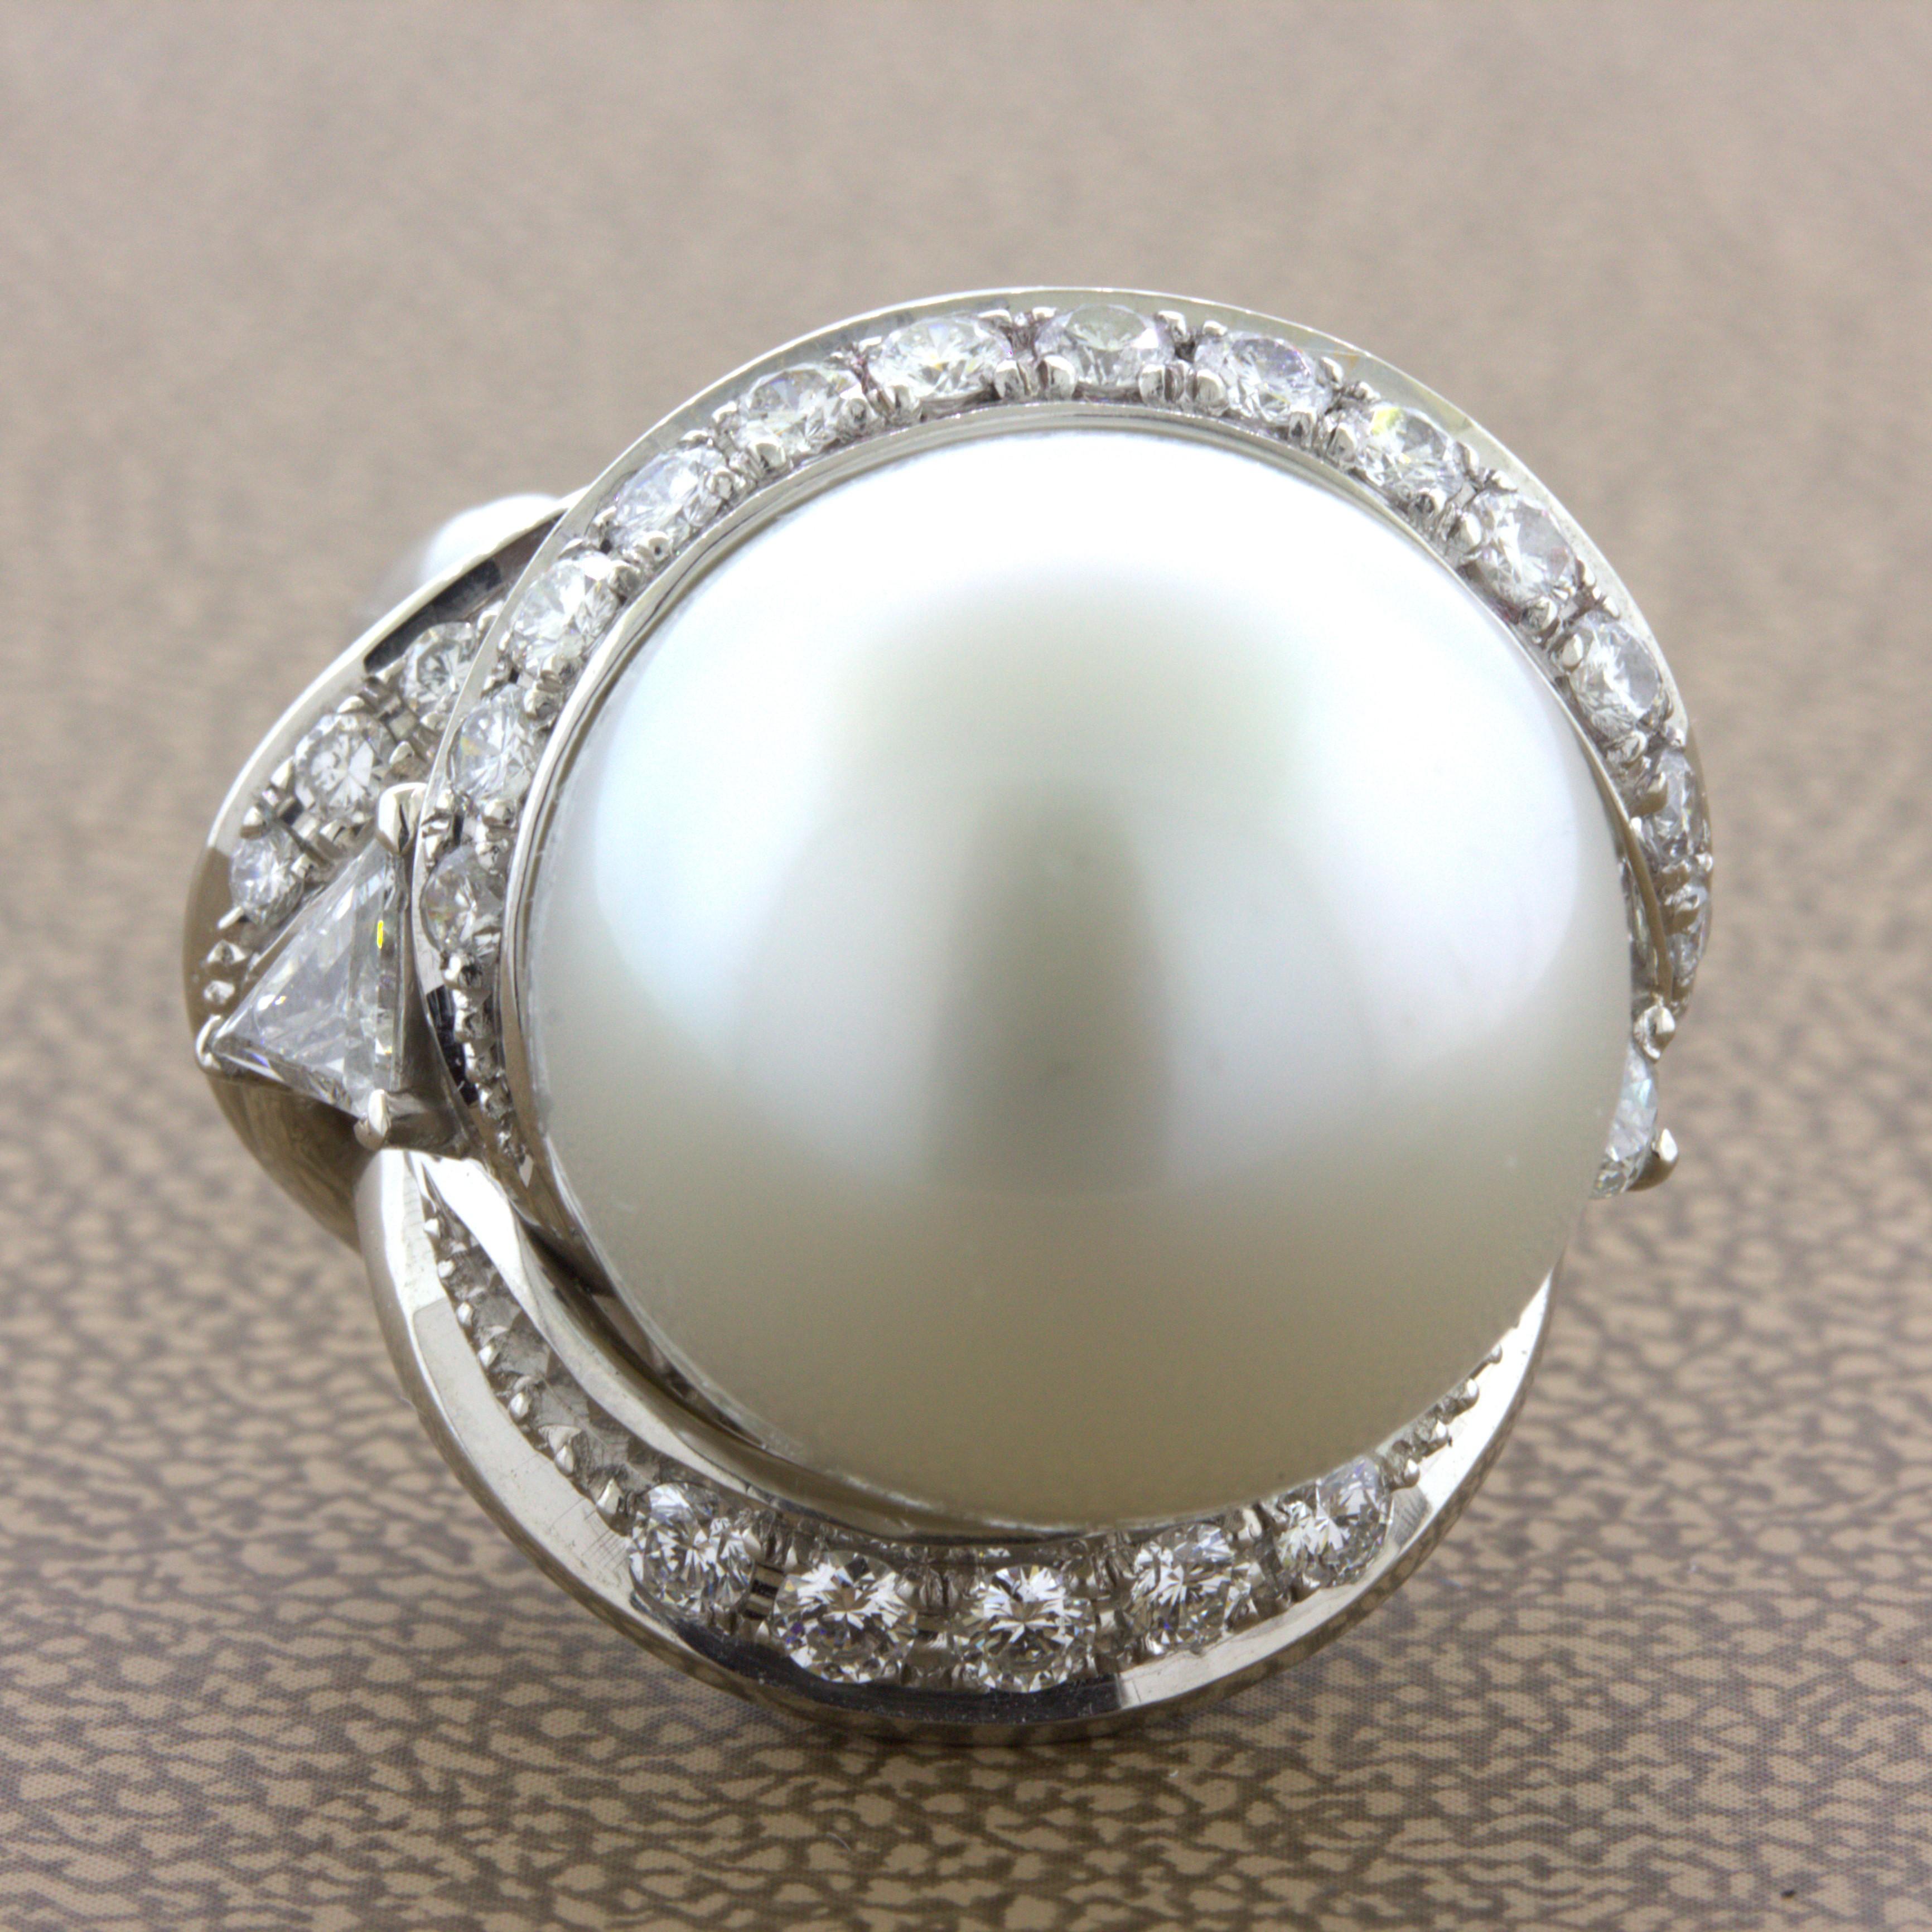 A large and beautiful ring featuring a fine south sea pearl measuring an impressive 16mm in diameter. Not only does it have a large size, but it is of top-quality. It glows in the light with a soft pink overtone due to its very strong luster and